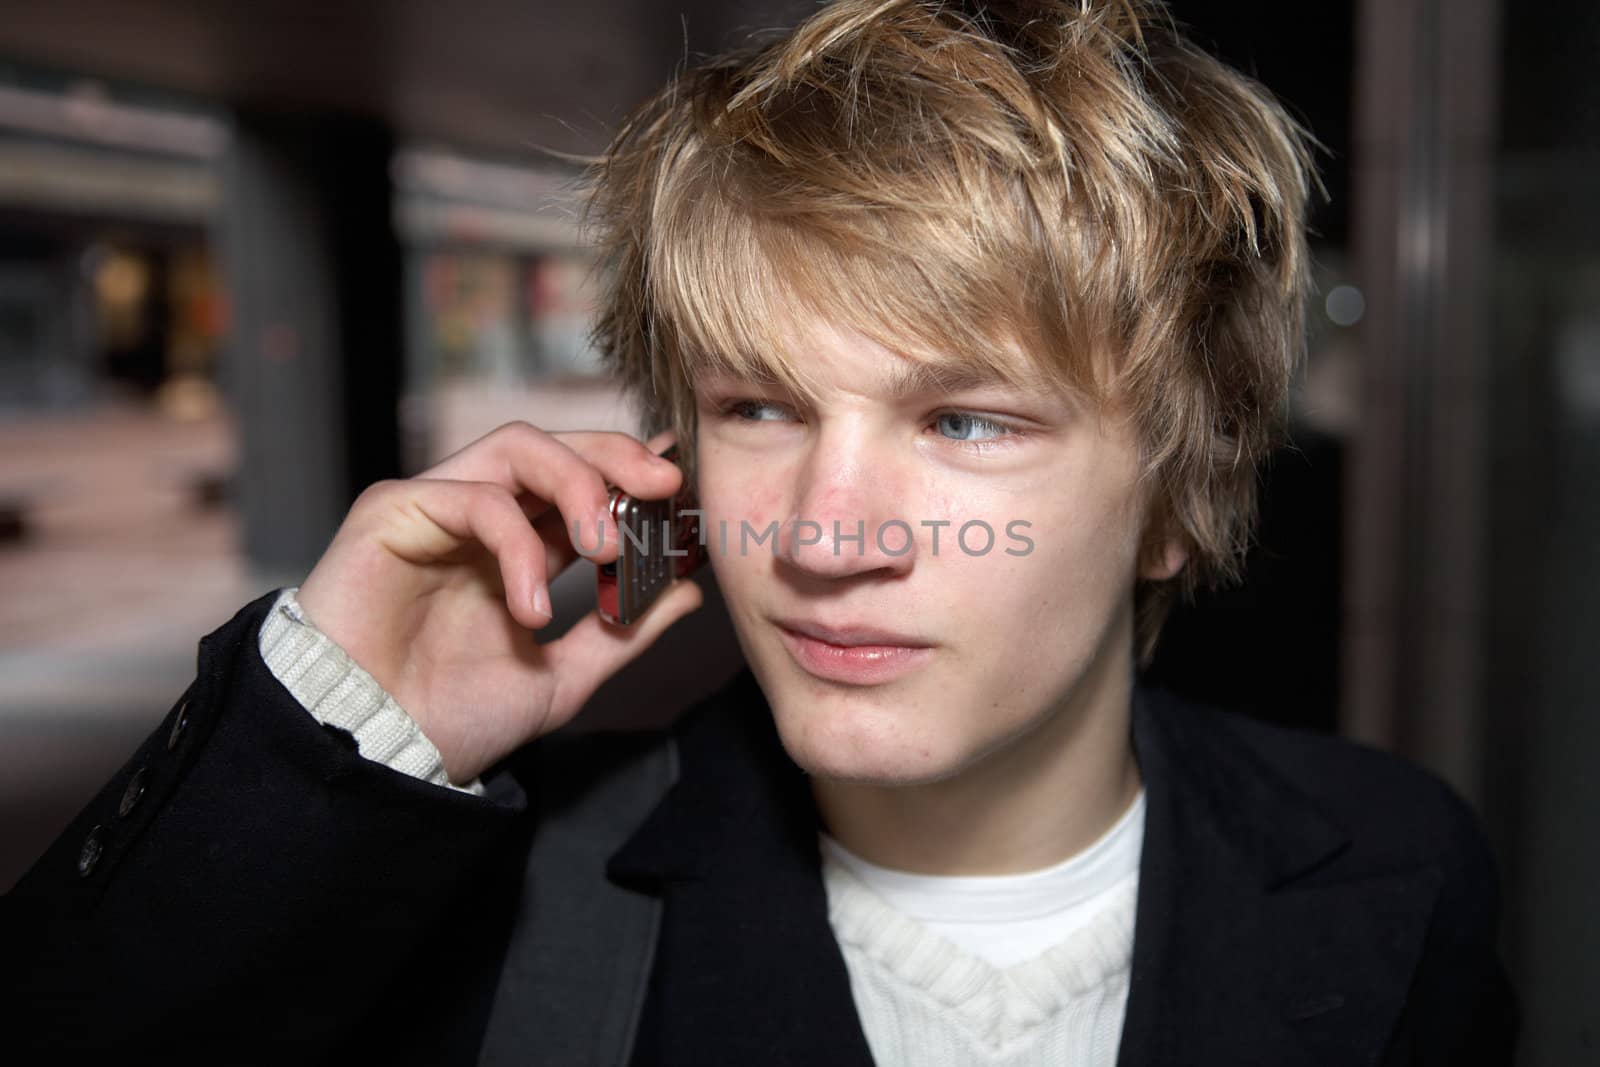 Teenage boy with on mobile phone in city street